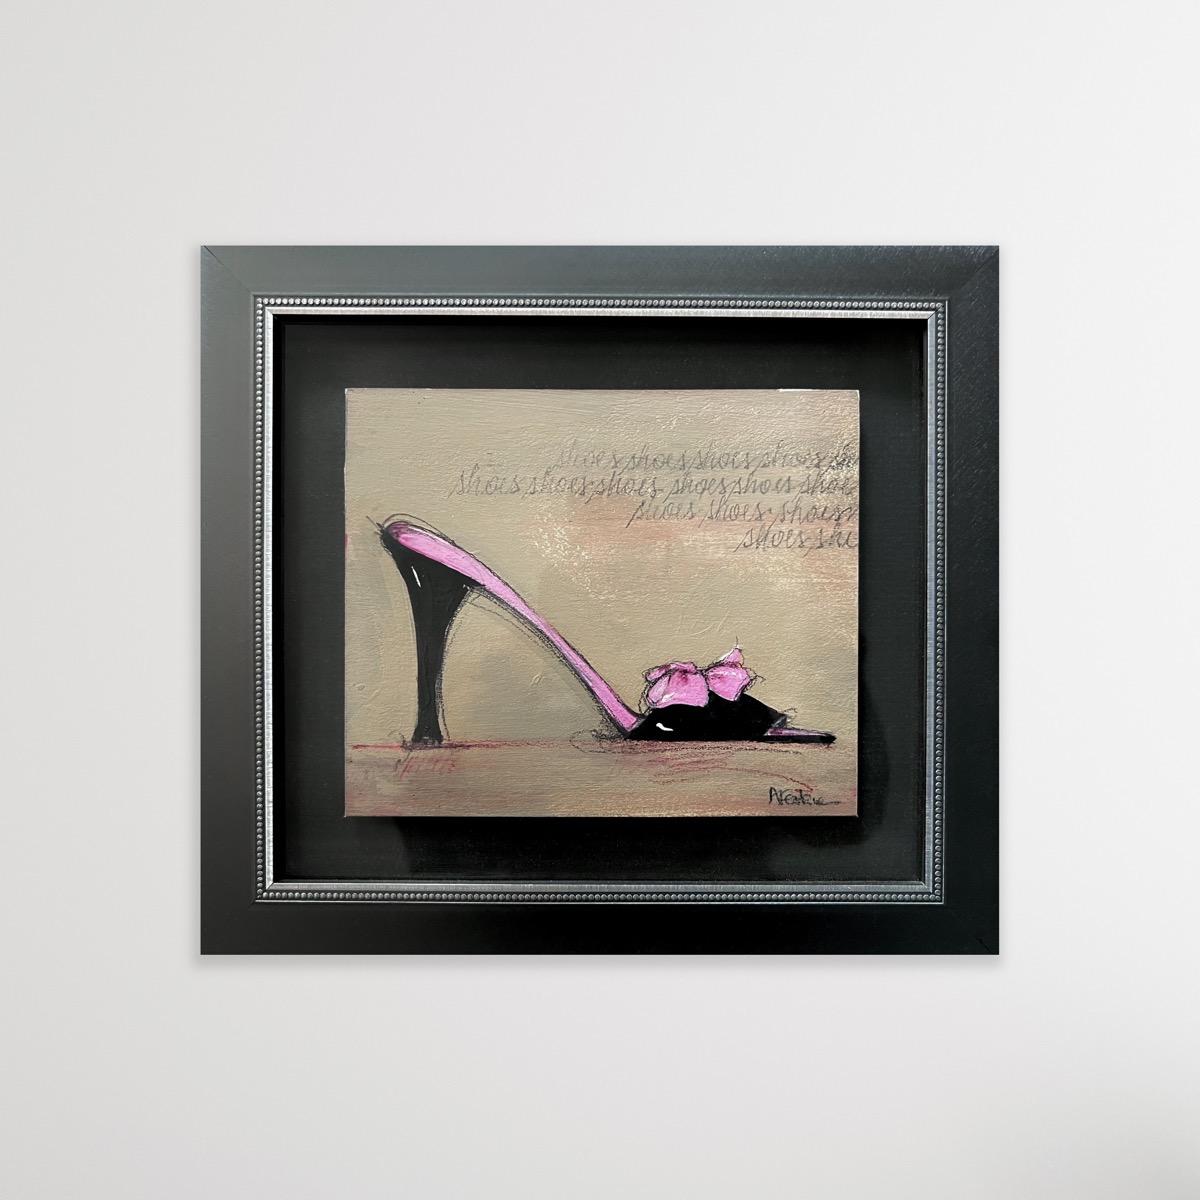 I Love Shoes - 6 (8.25”x9.25”, framed, part of series) For Sale 5